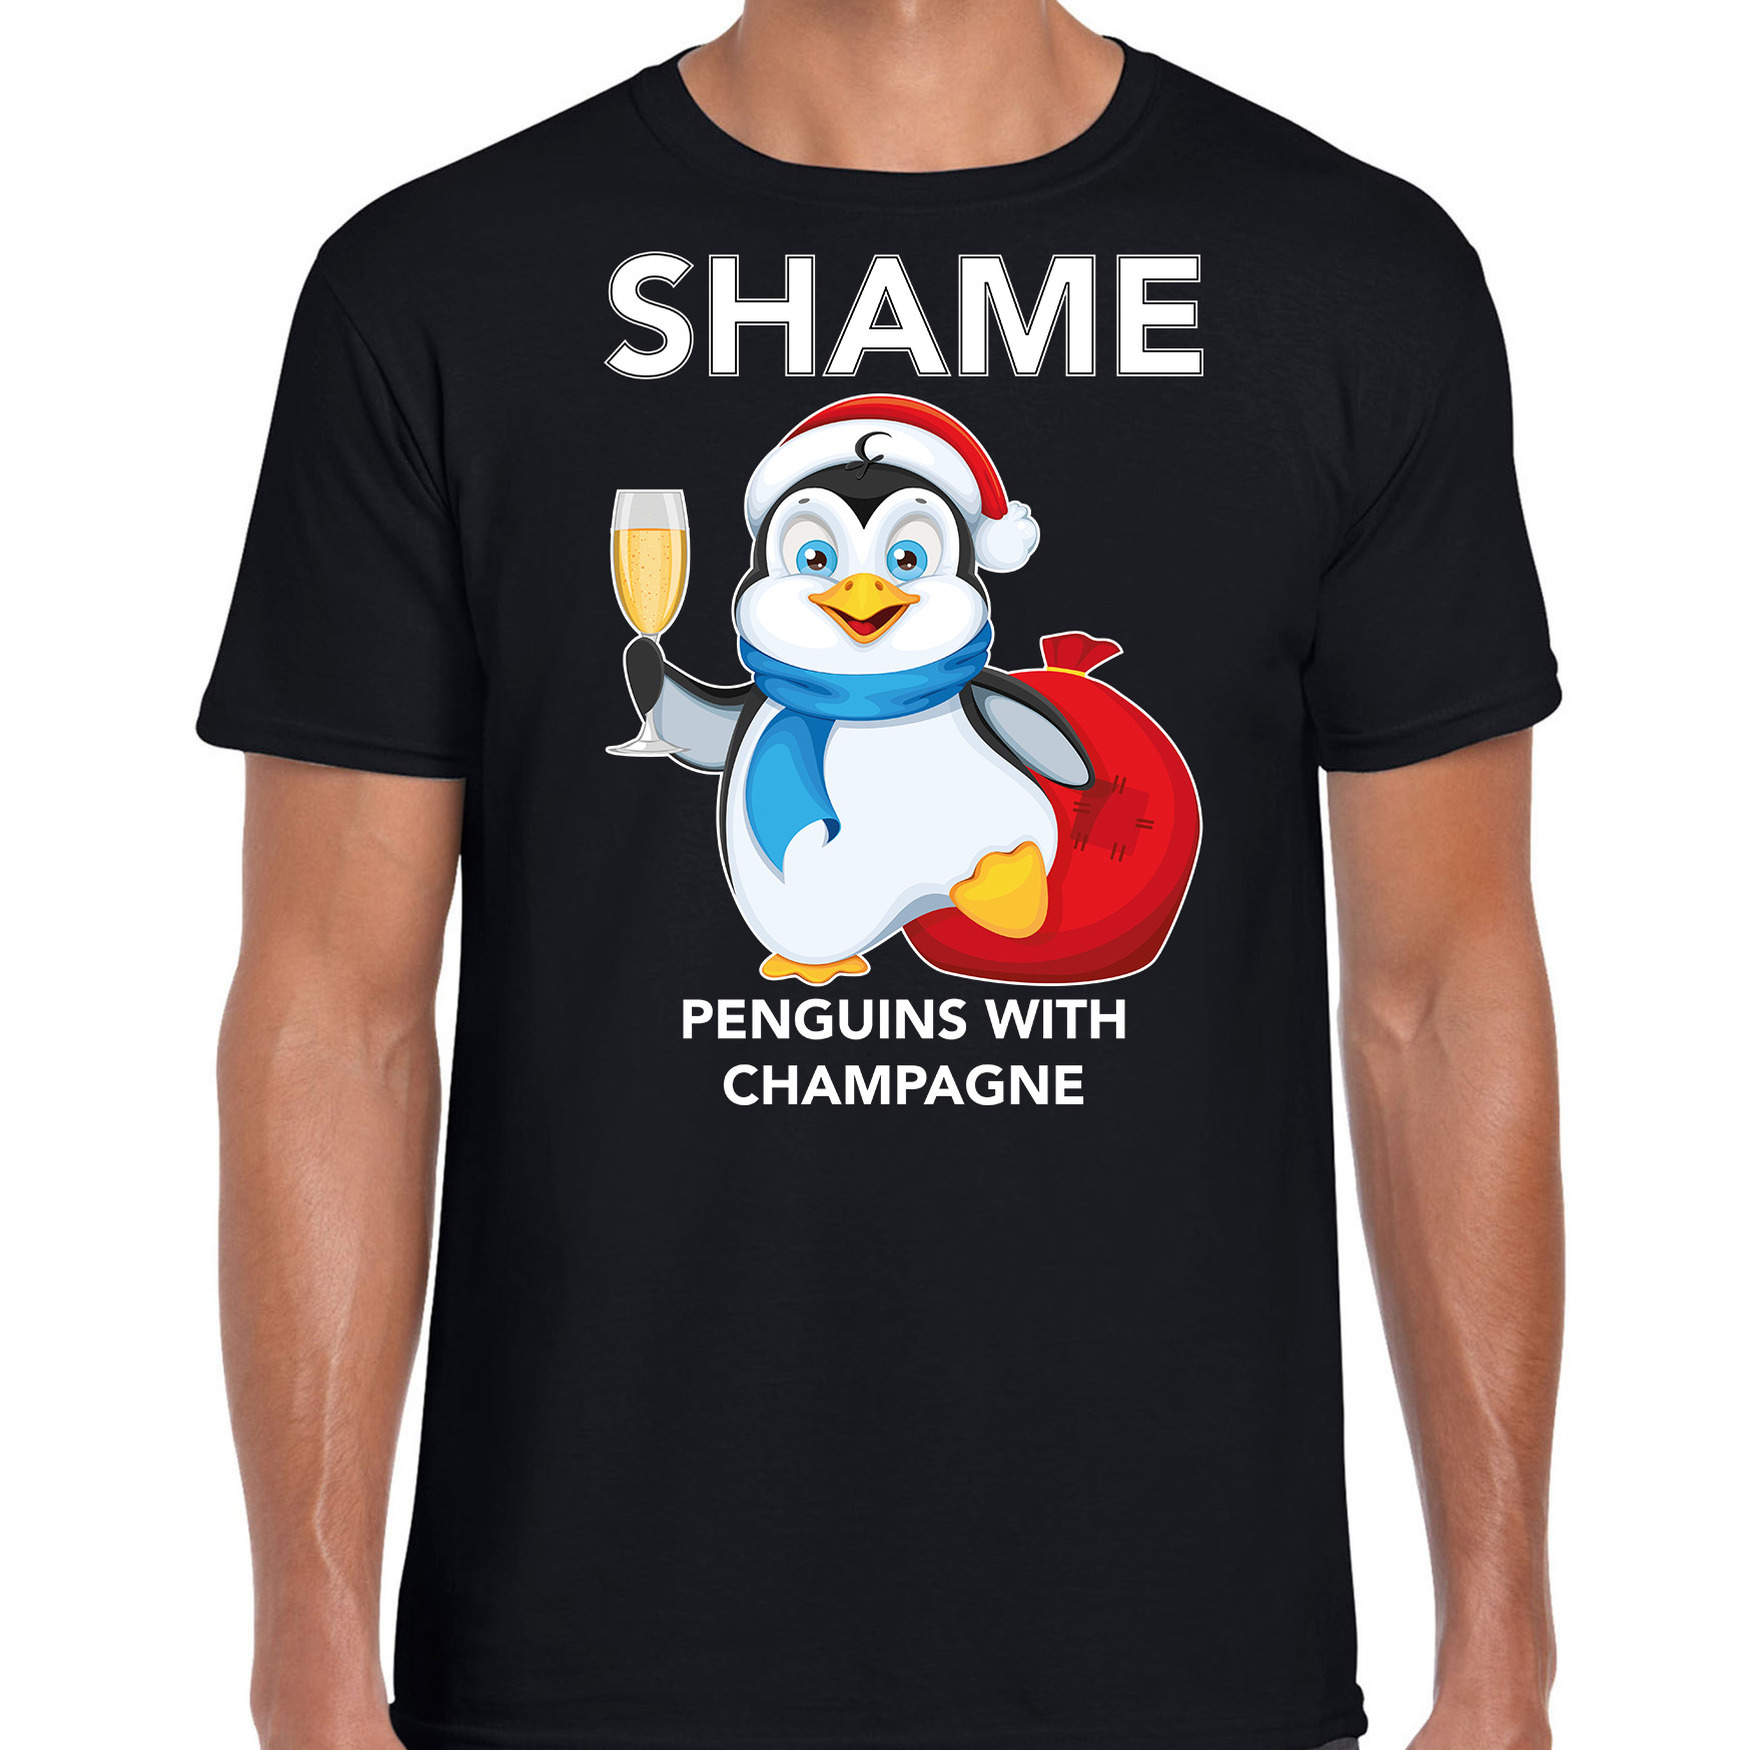 Pinguin Kerst t-shirt-outfit Shame penguins with champagne zwart voor heren